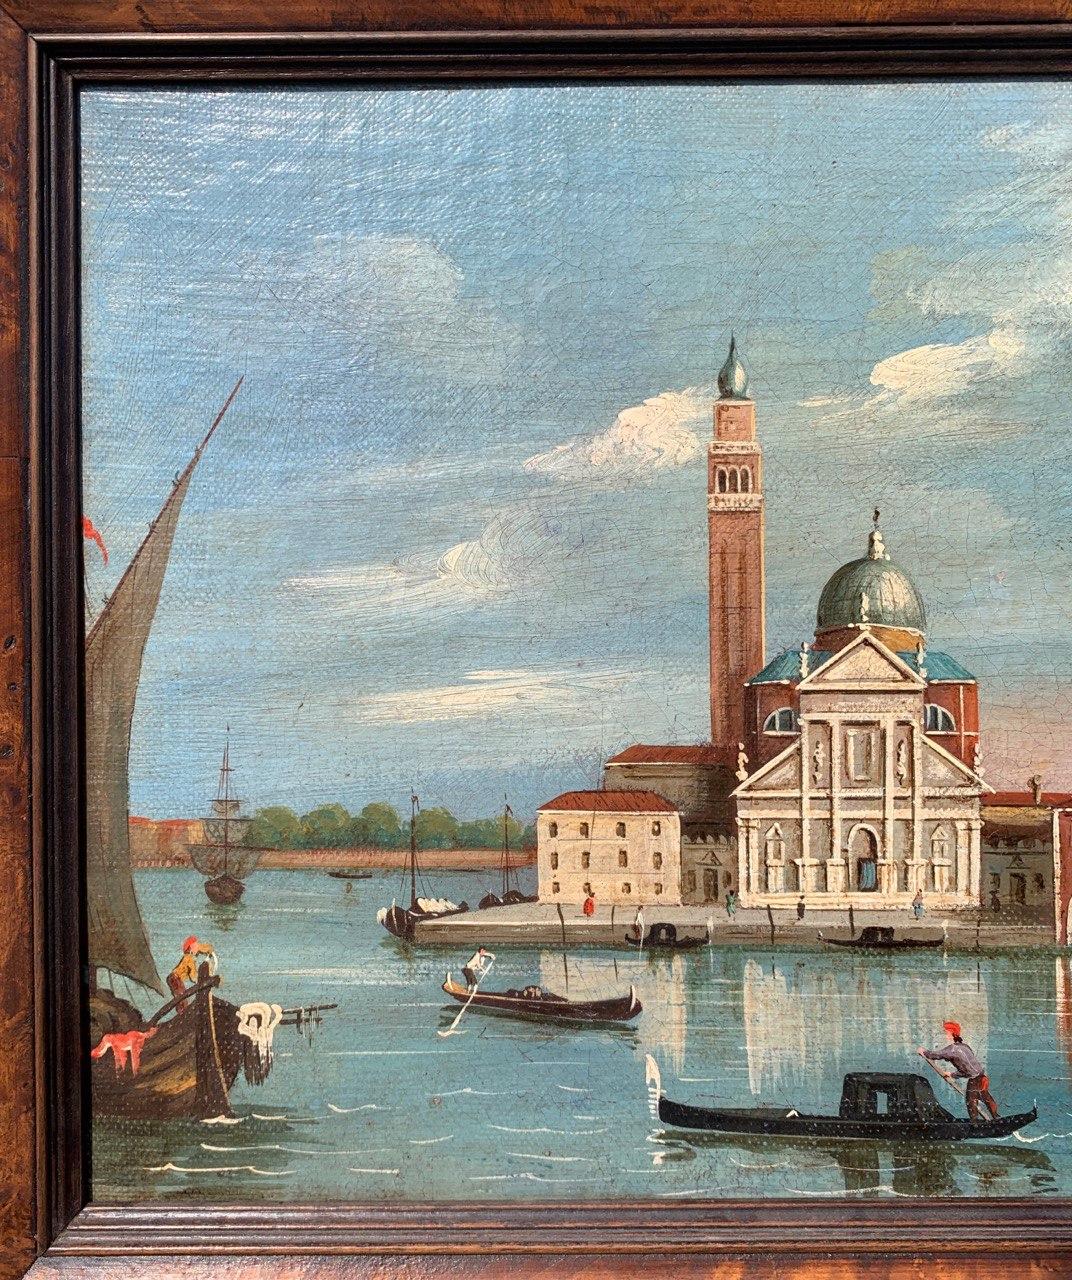 Follower of Antonio Canal, known as Canaletto (19th century) - Venice, view of the Island of S. Giorgio from the Punta della Dogana.

30 x 40 cm without frame, 41.5 x 51.5 cm with frame.

Oil on canvas, in a wooden frame.

Condition report: Lined